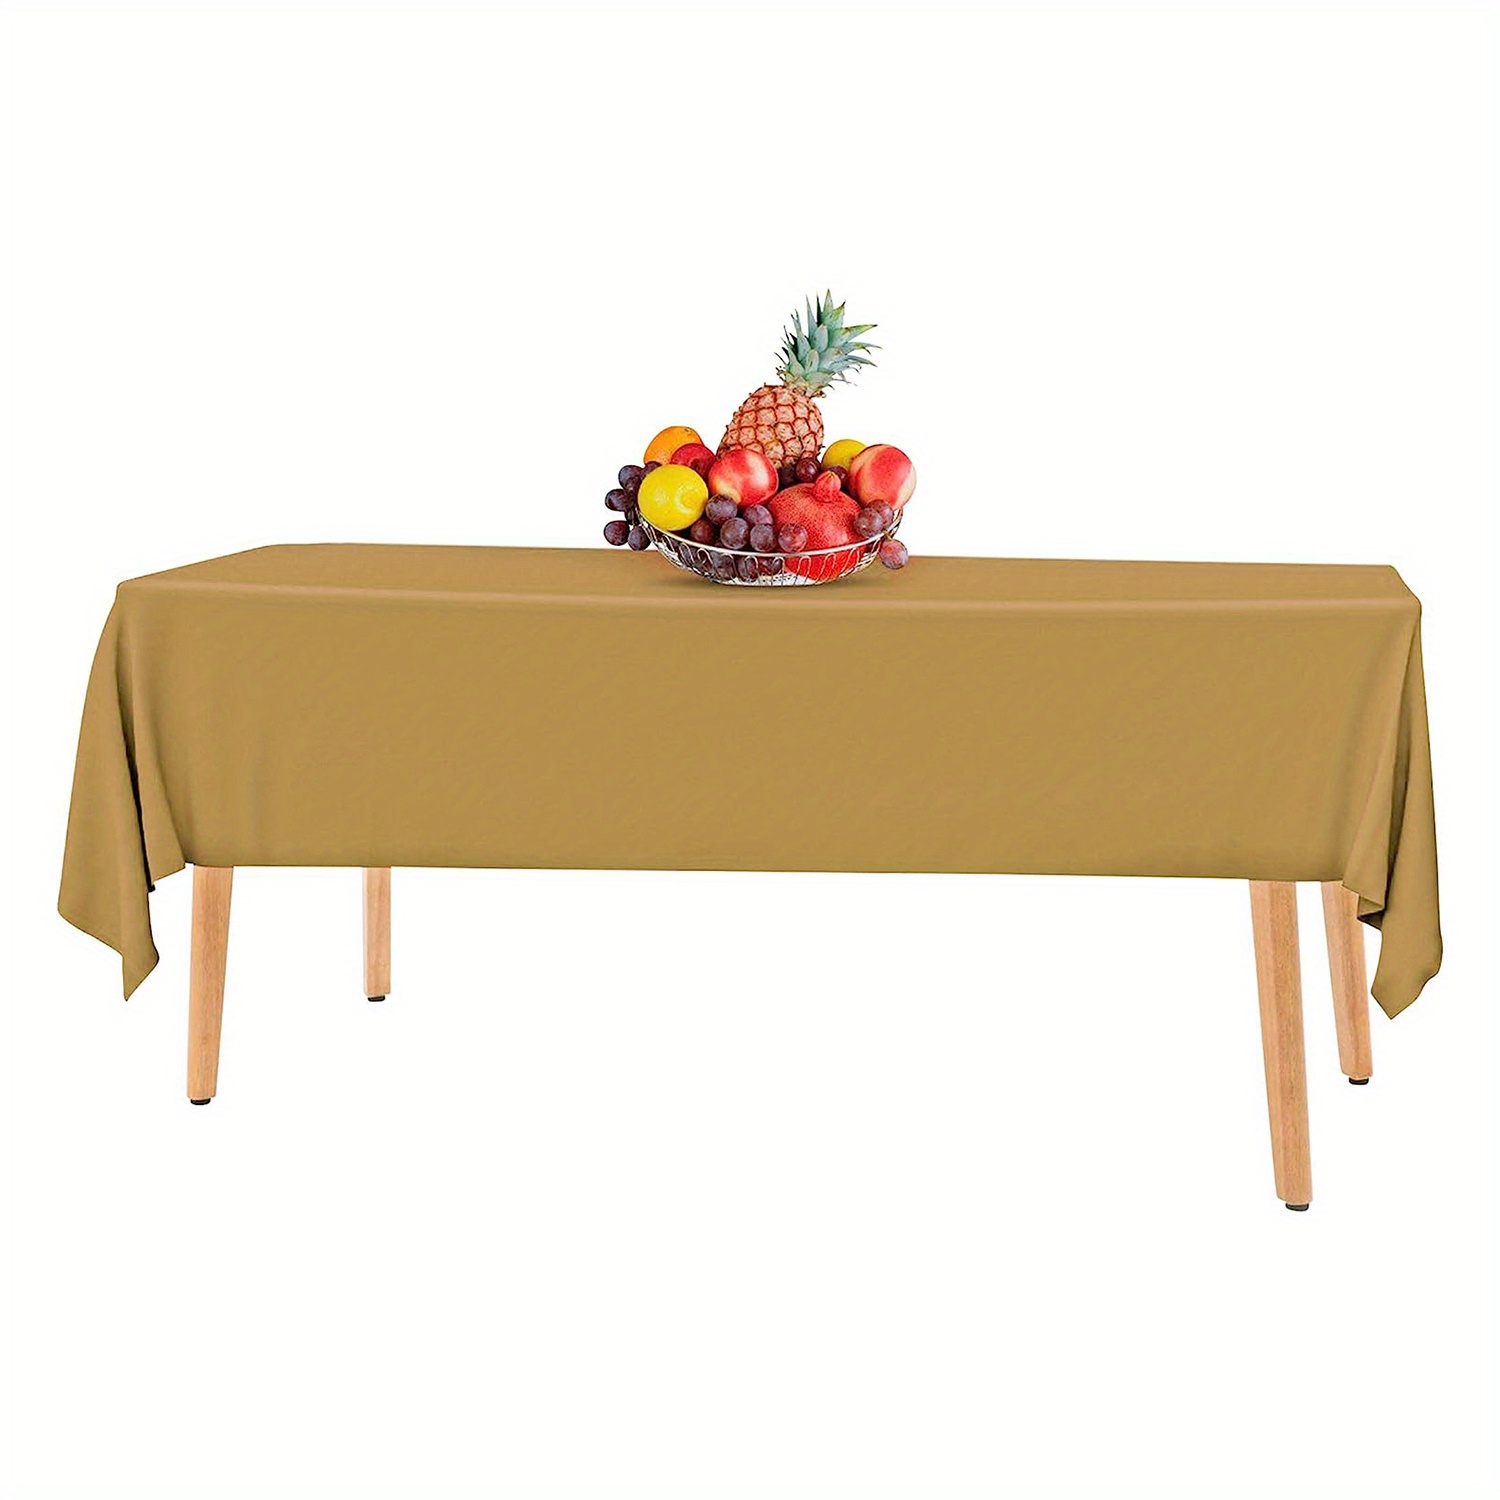 Disposable Table Cover: Durable Plastic Indoor/Outdoor Tablecloth